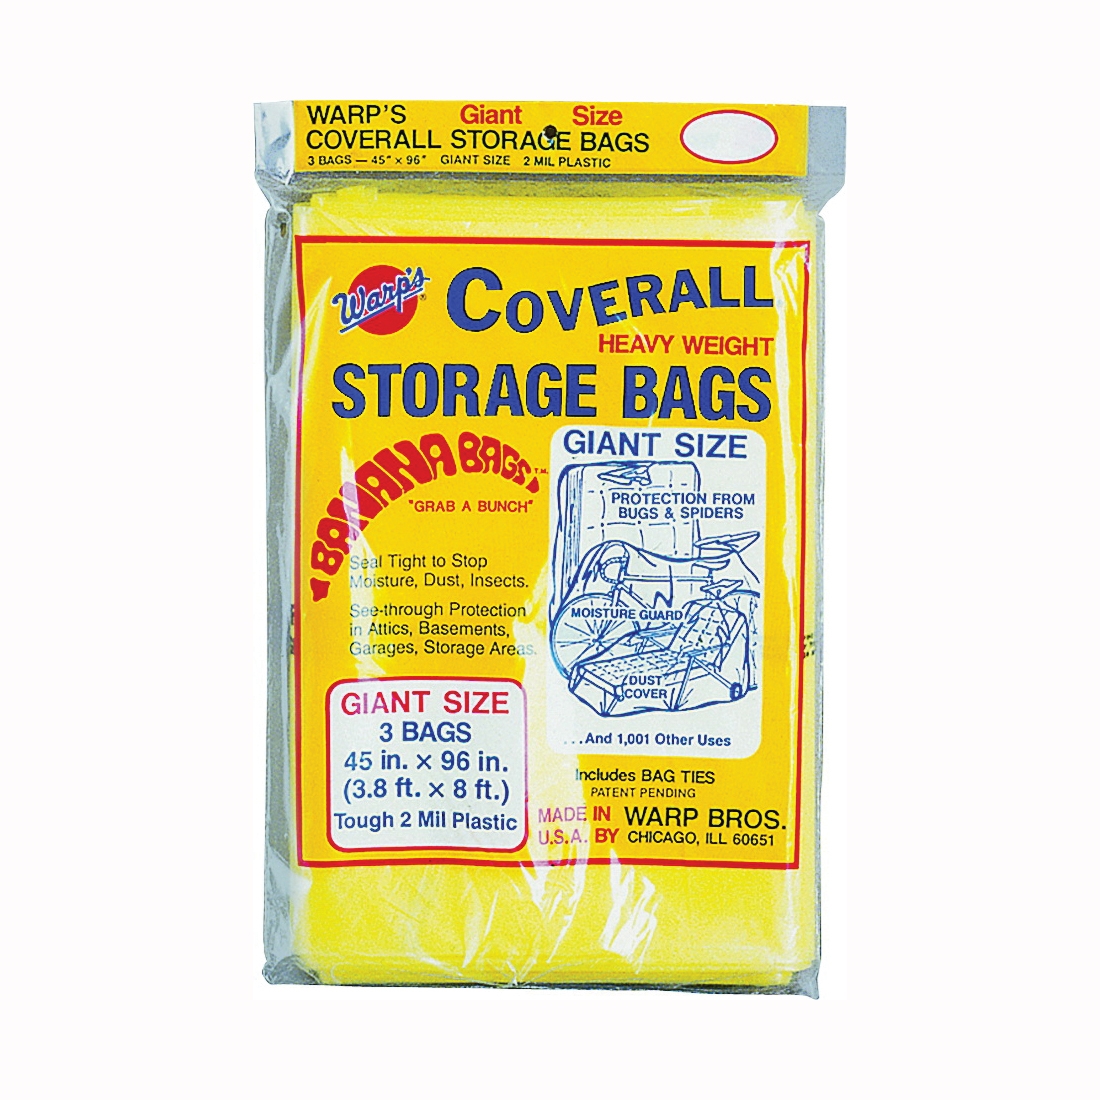 Wrap's Banana Bags CB-45 Storage Bag, Giant, Plastic, Yellow, 45 in L, 96 in W, 2 mil Thick